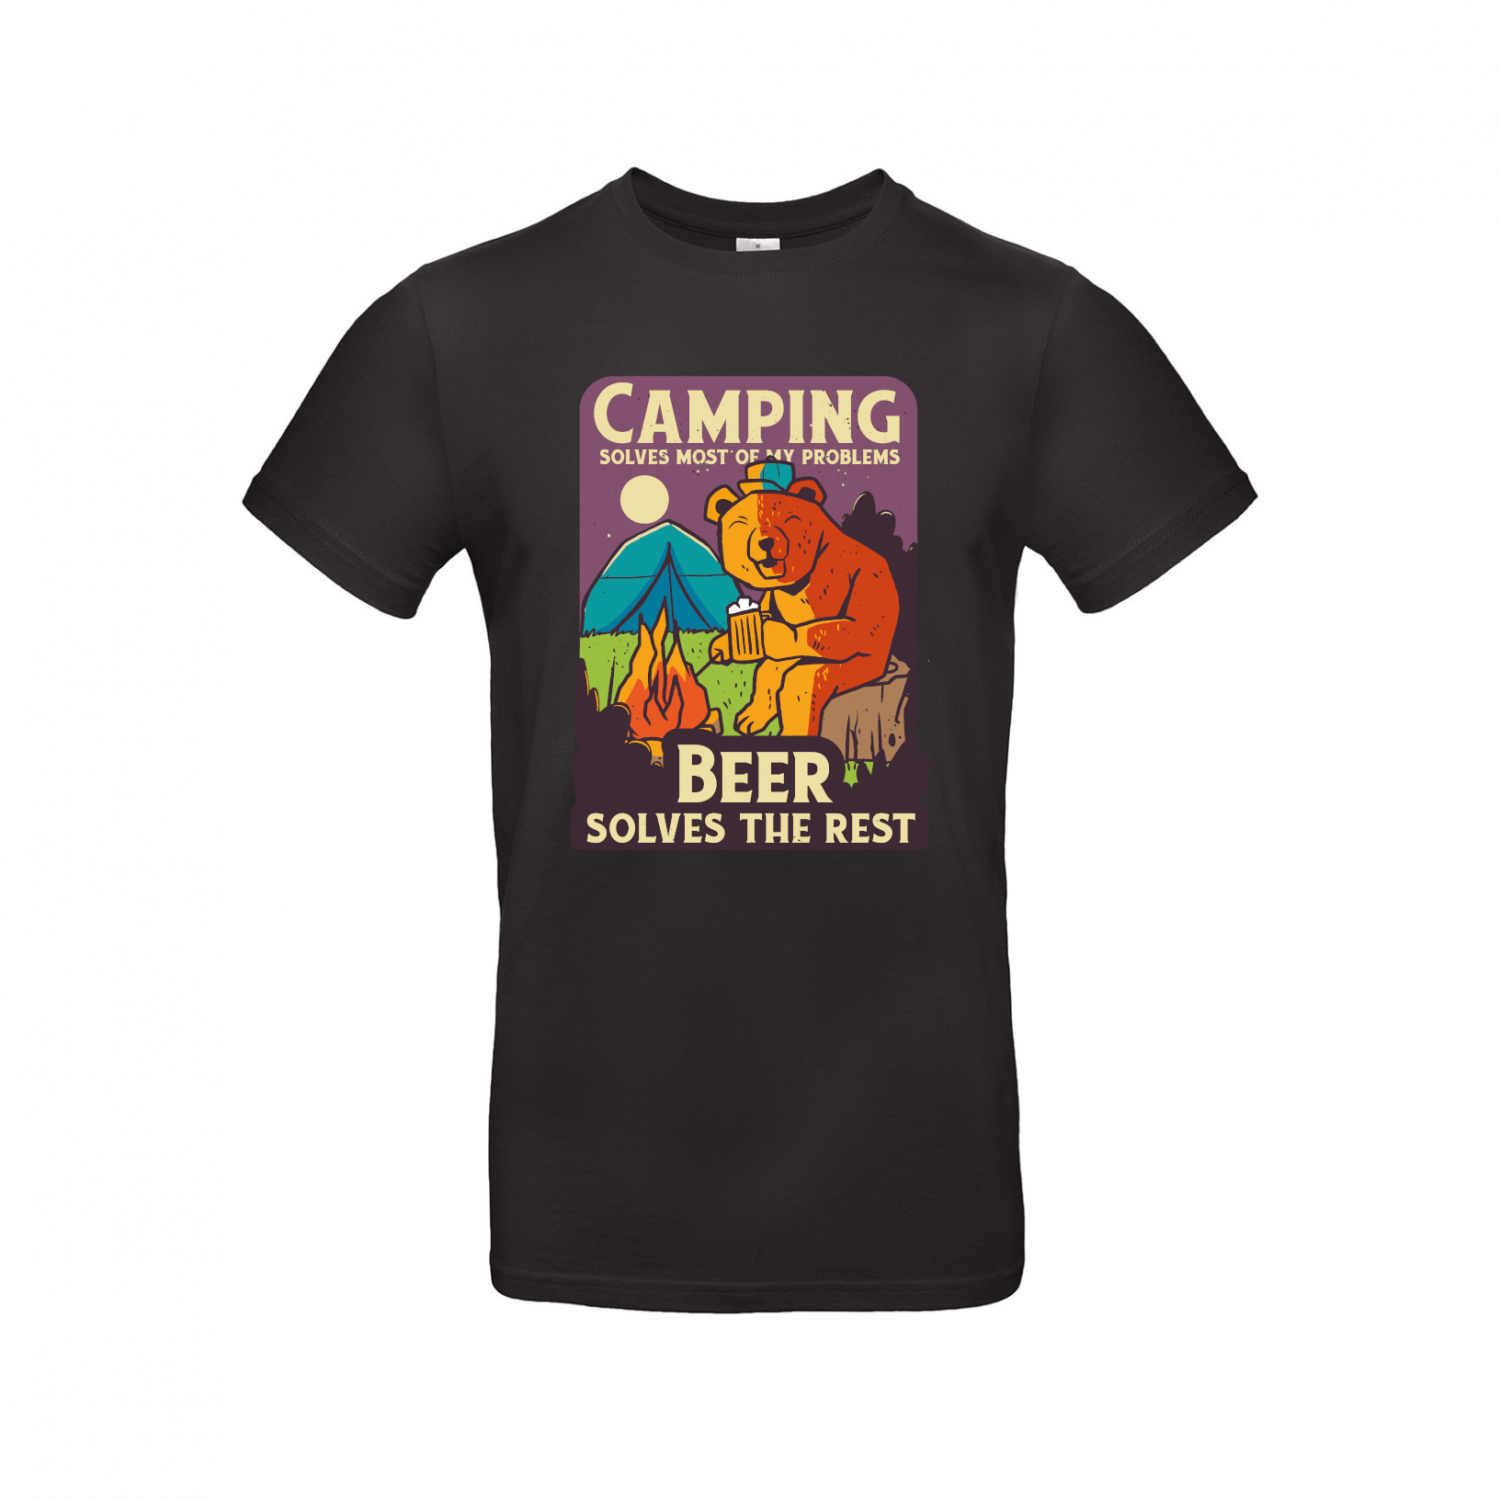 T-Shirt | Camping solves most of my Problems, Beer solves the Rest - Herren T-Shirt